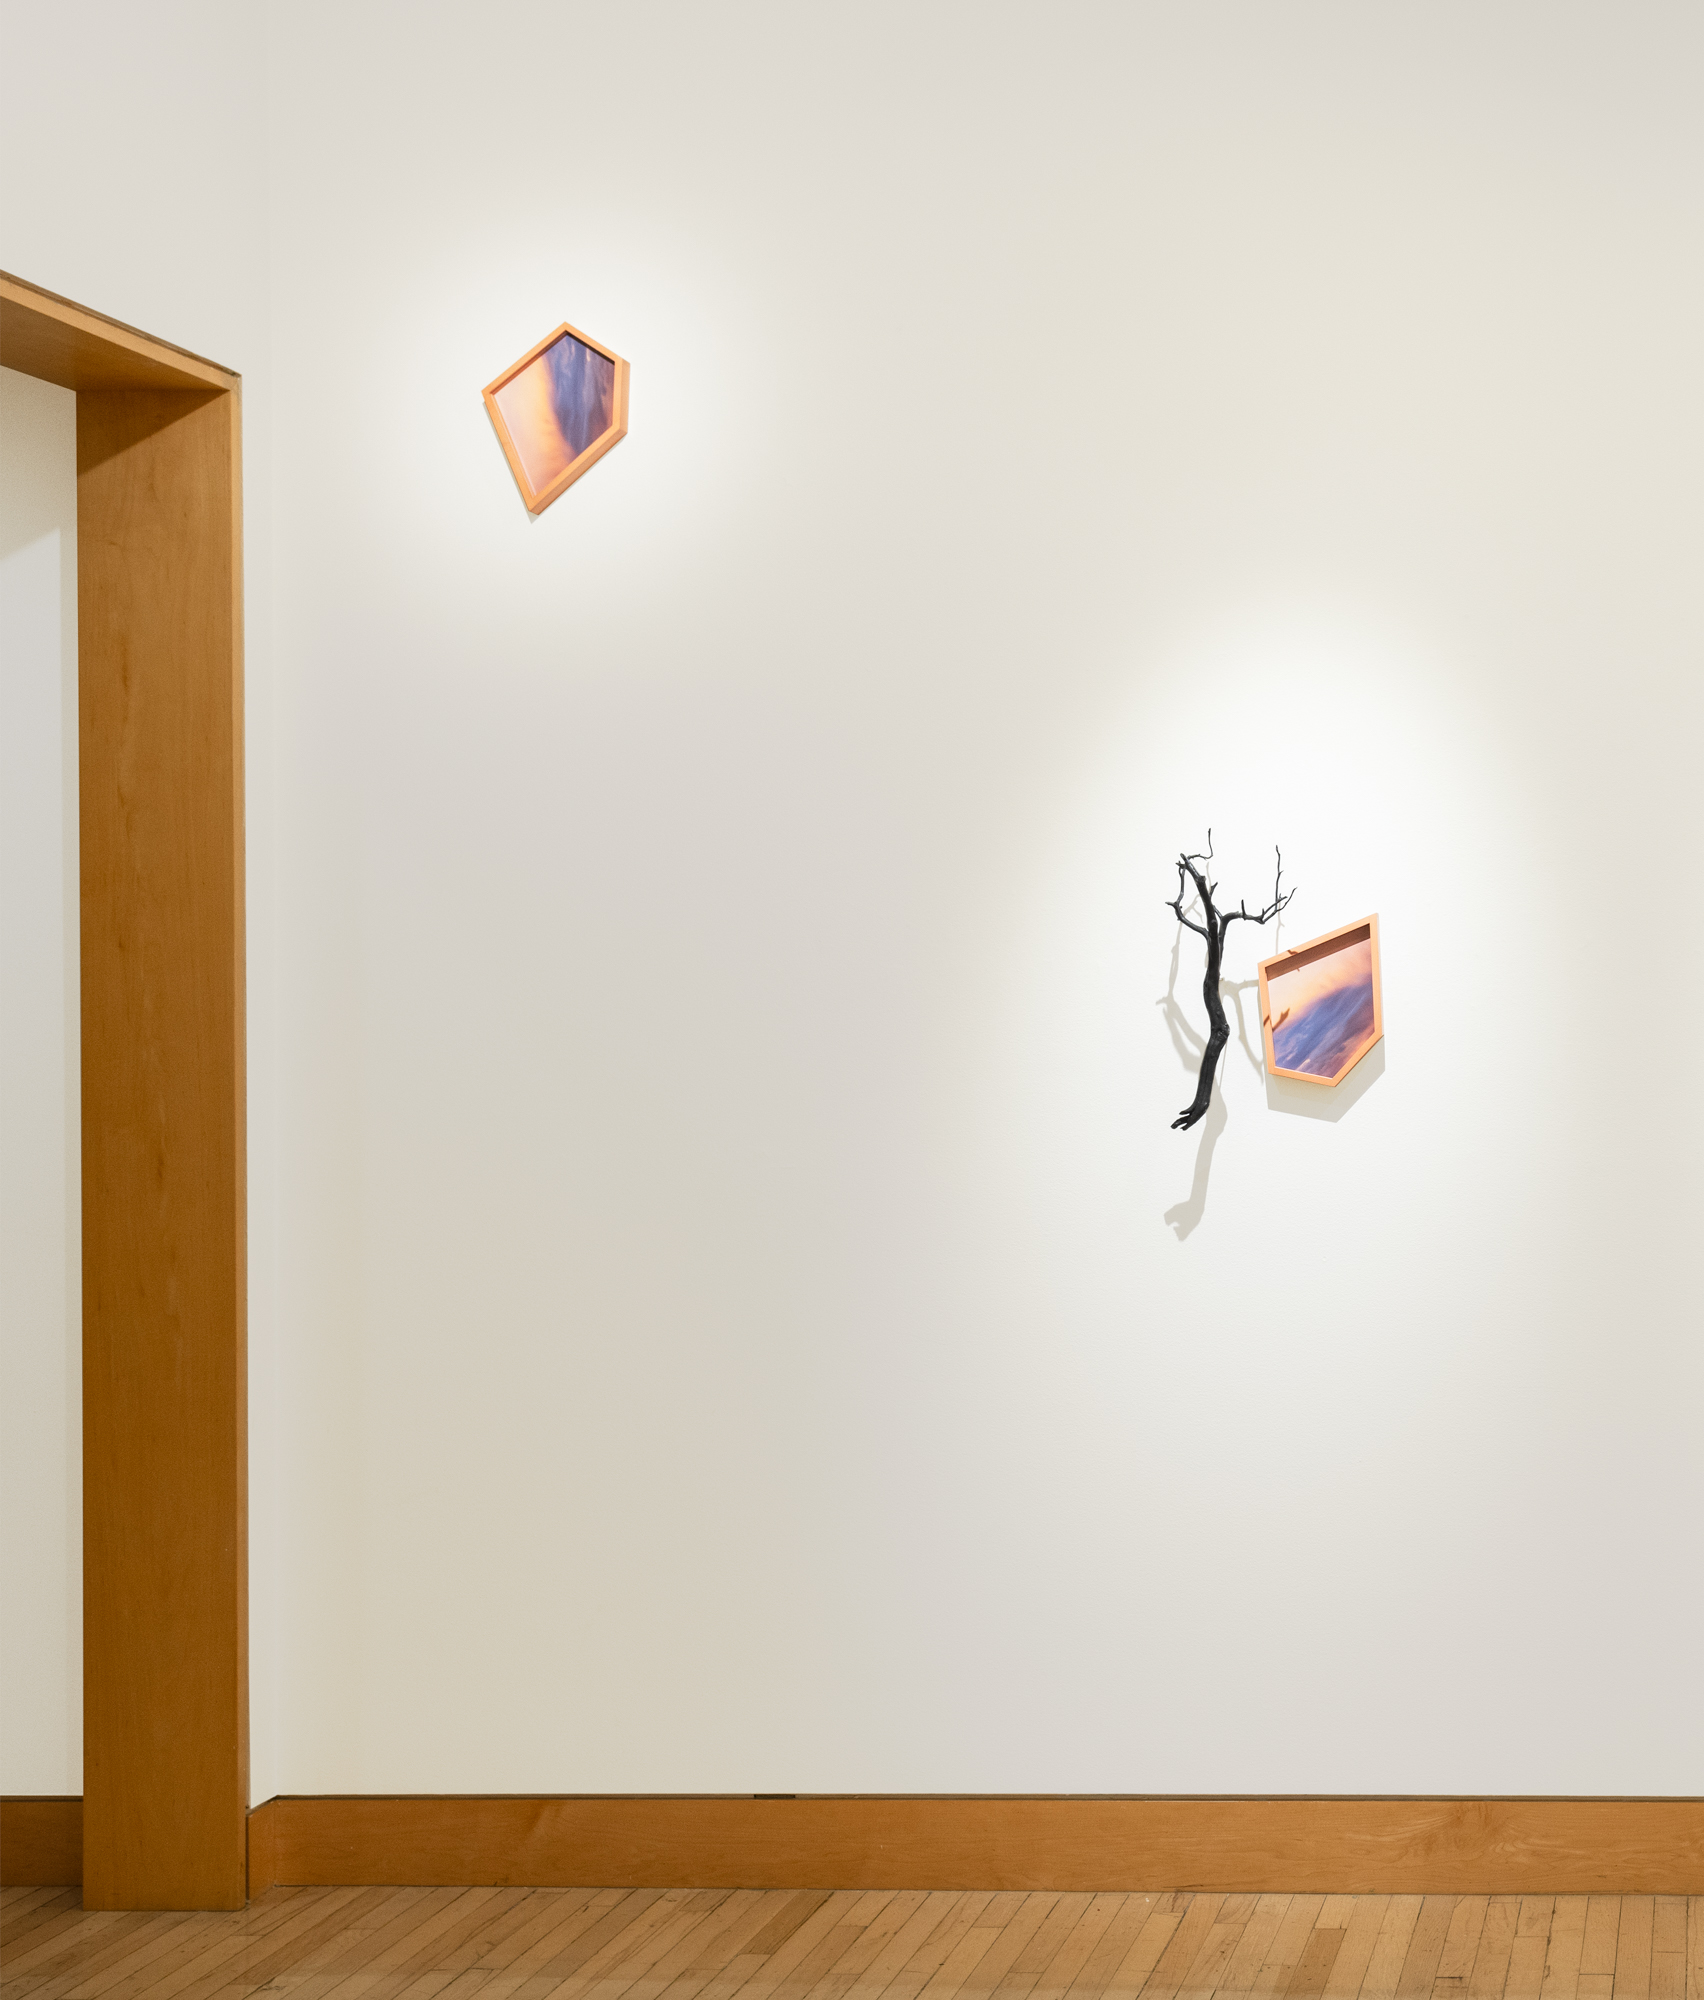 Installation shot of a sculptural work including two framed color photographs and a bronze branch